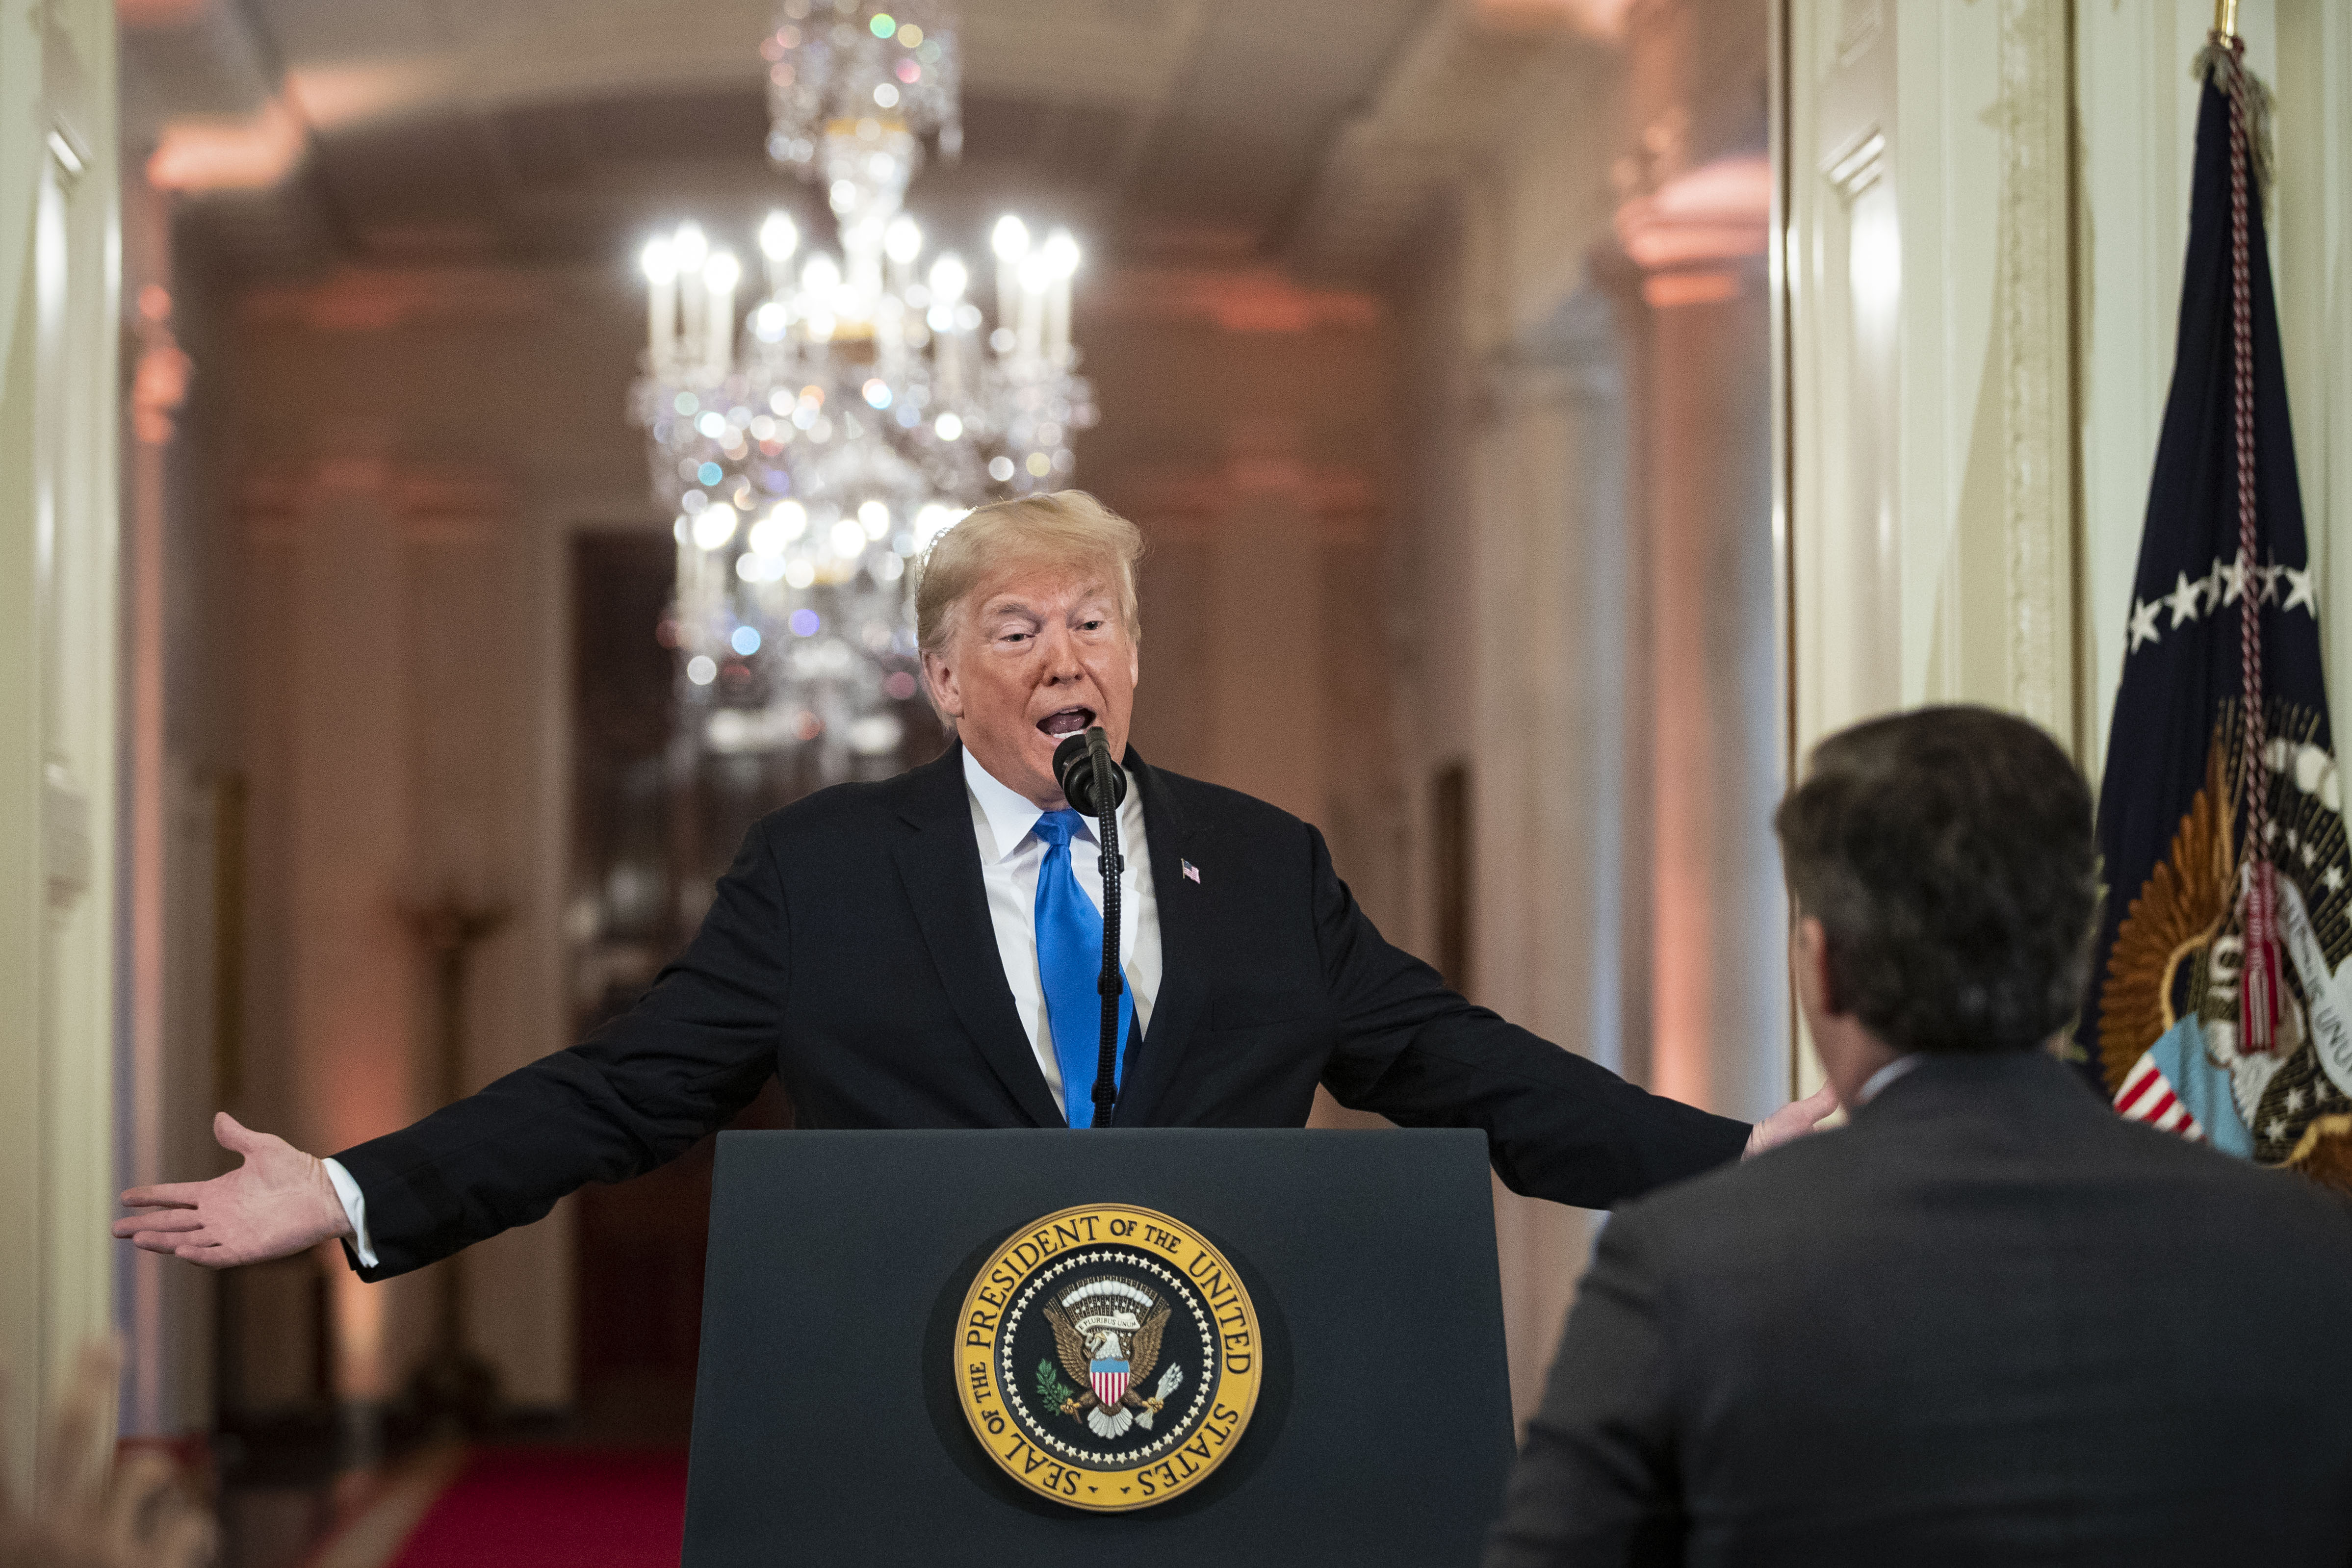 WASHINGTON, DC - NOVEMBER 07: (AFP OUT) U.S. President Donald Trump gets into an exchange with CNN reporter Jim Acosta during a news conference a day after the midterm elections on November 7, 2018 in the East Room of the White House in Washington, DC. Republicans kept the Senate majority but lost control of the House to the Democrats. (Photo by Al Drago - Pool/Getty Images)